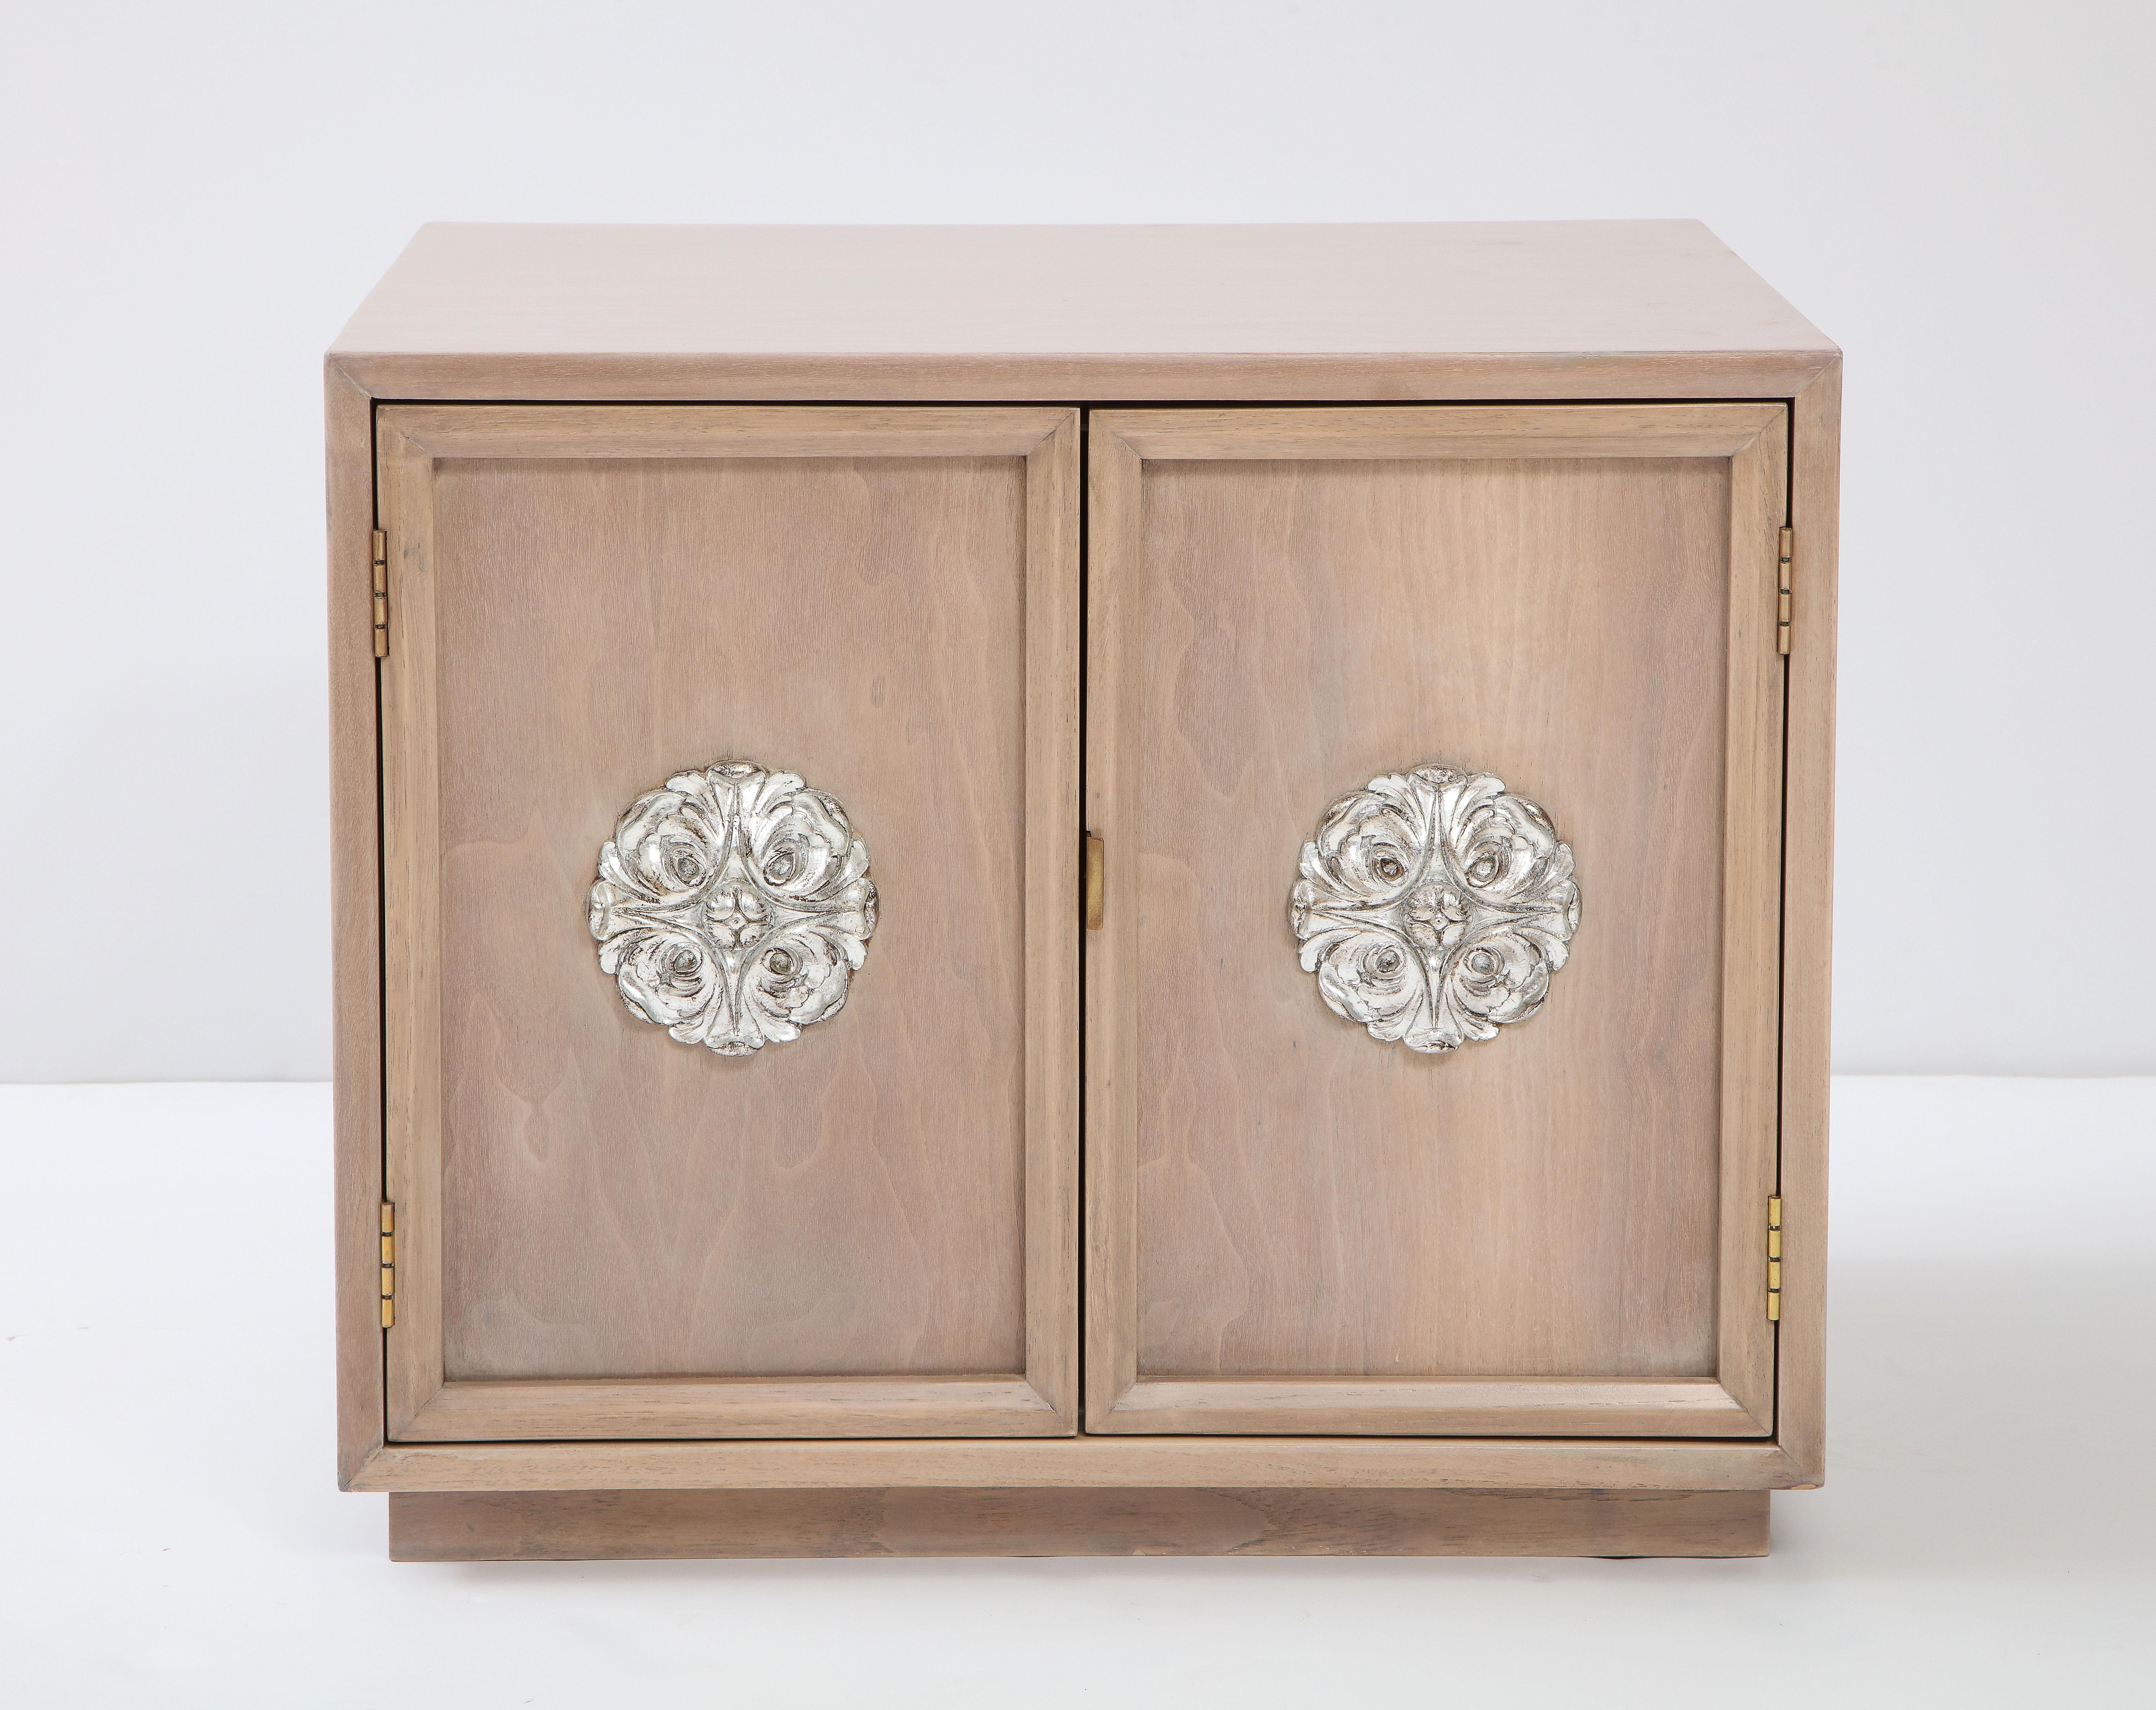 Monteverdi-Young midcentury side cabinets/nightstands in a custom bleached driftwood finish featuring silver leaf medallion pulls.